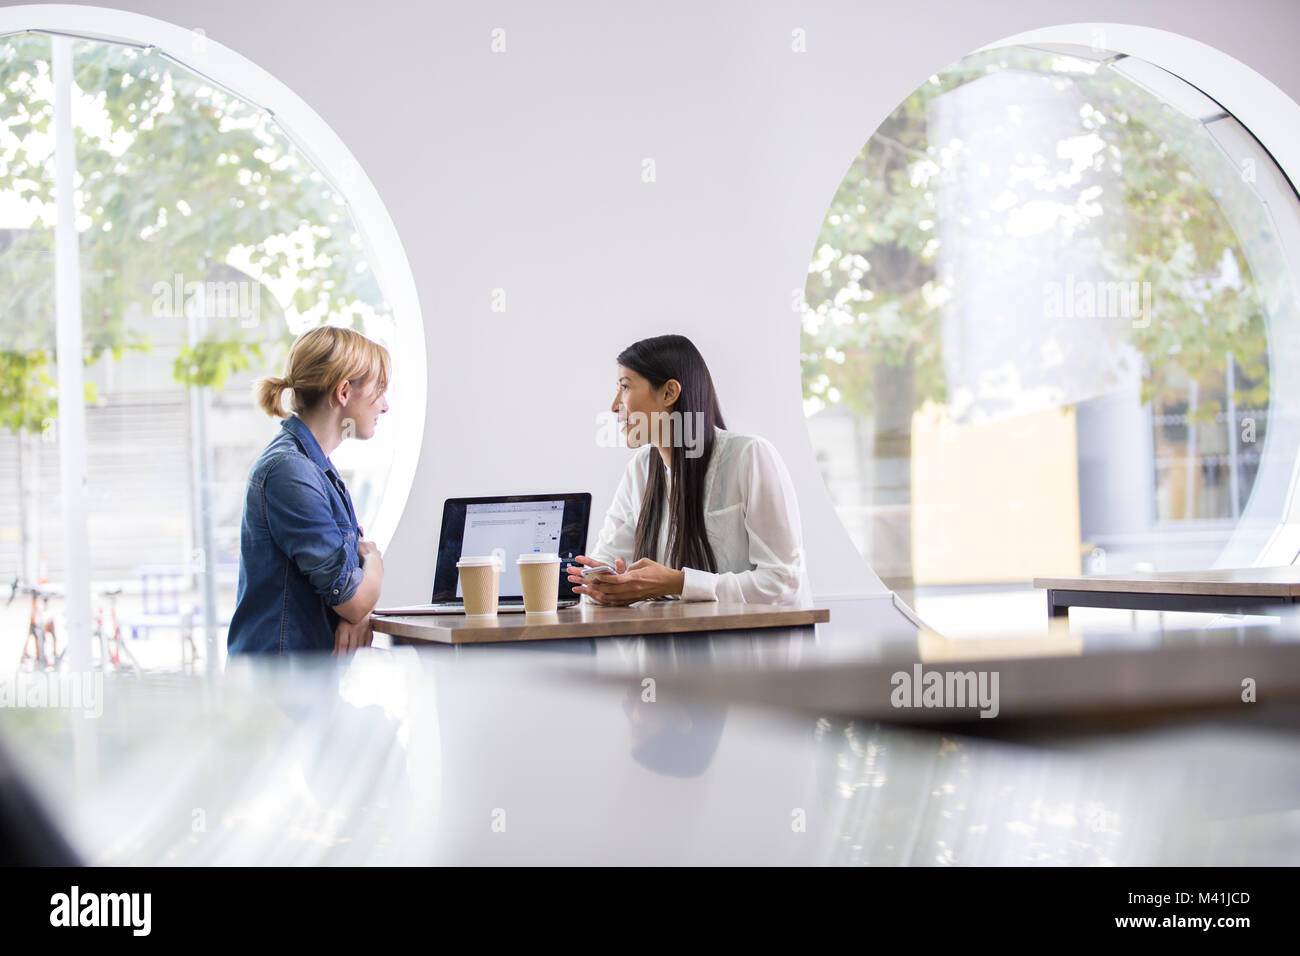 Female colleagues having a casual business meeting Stock Photo